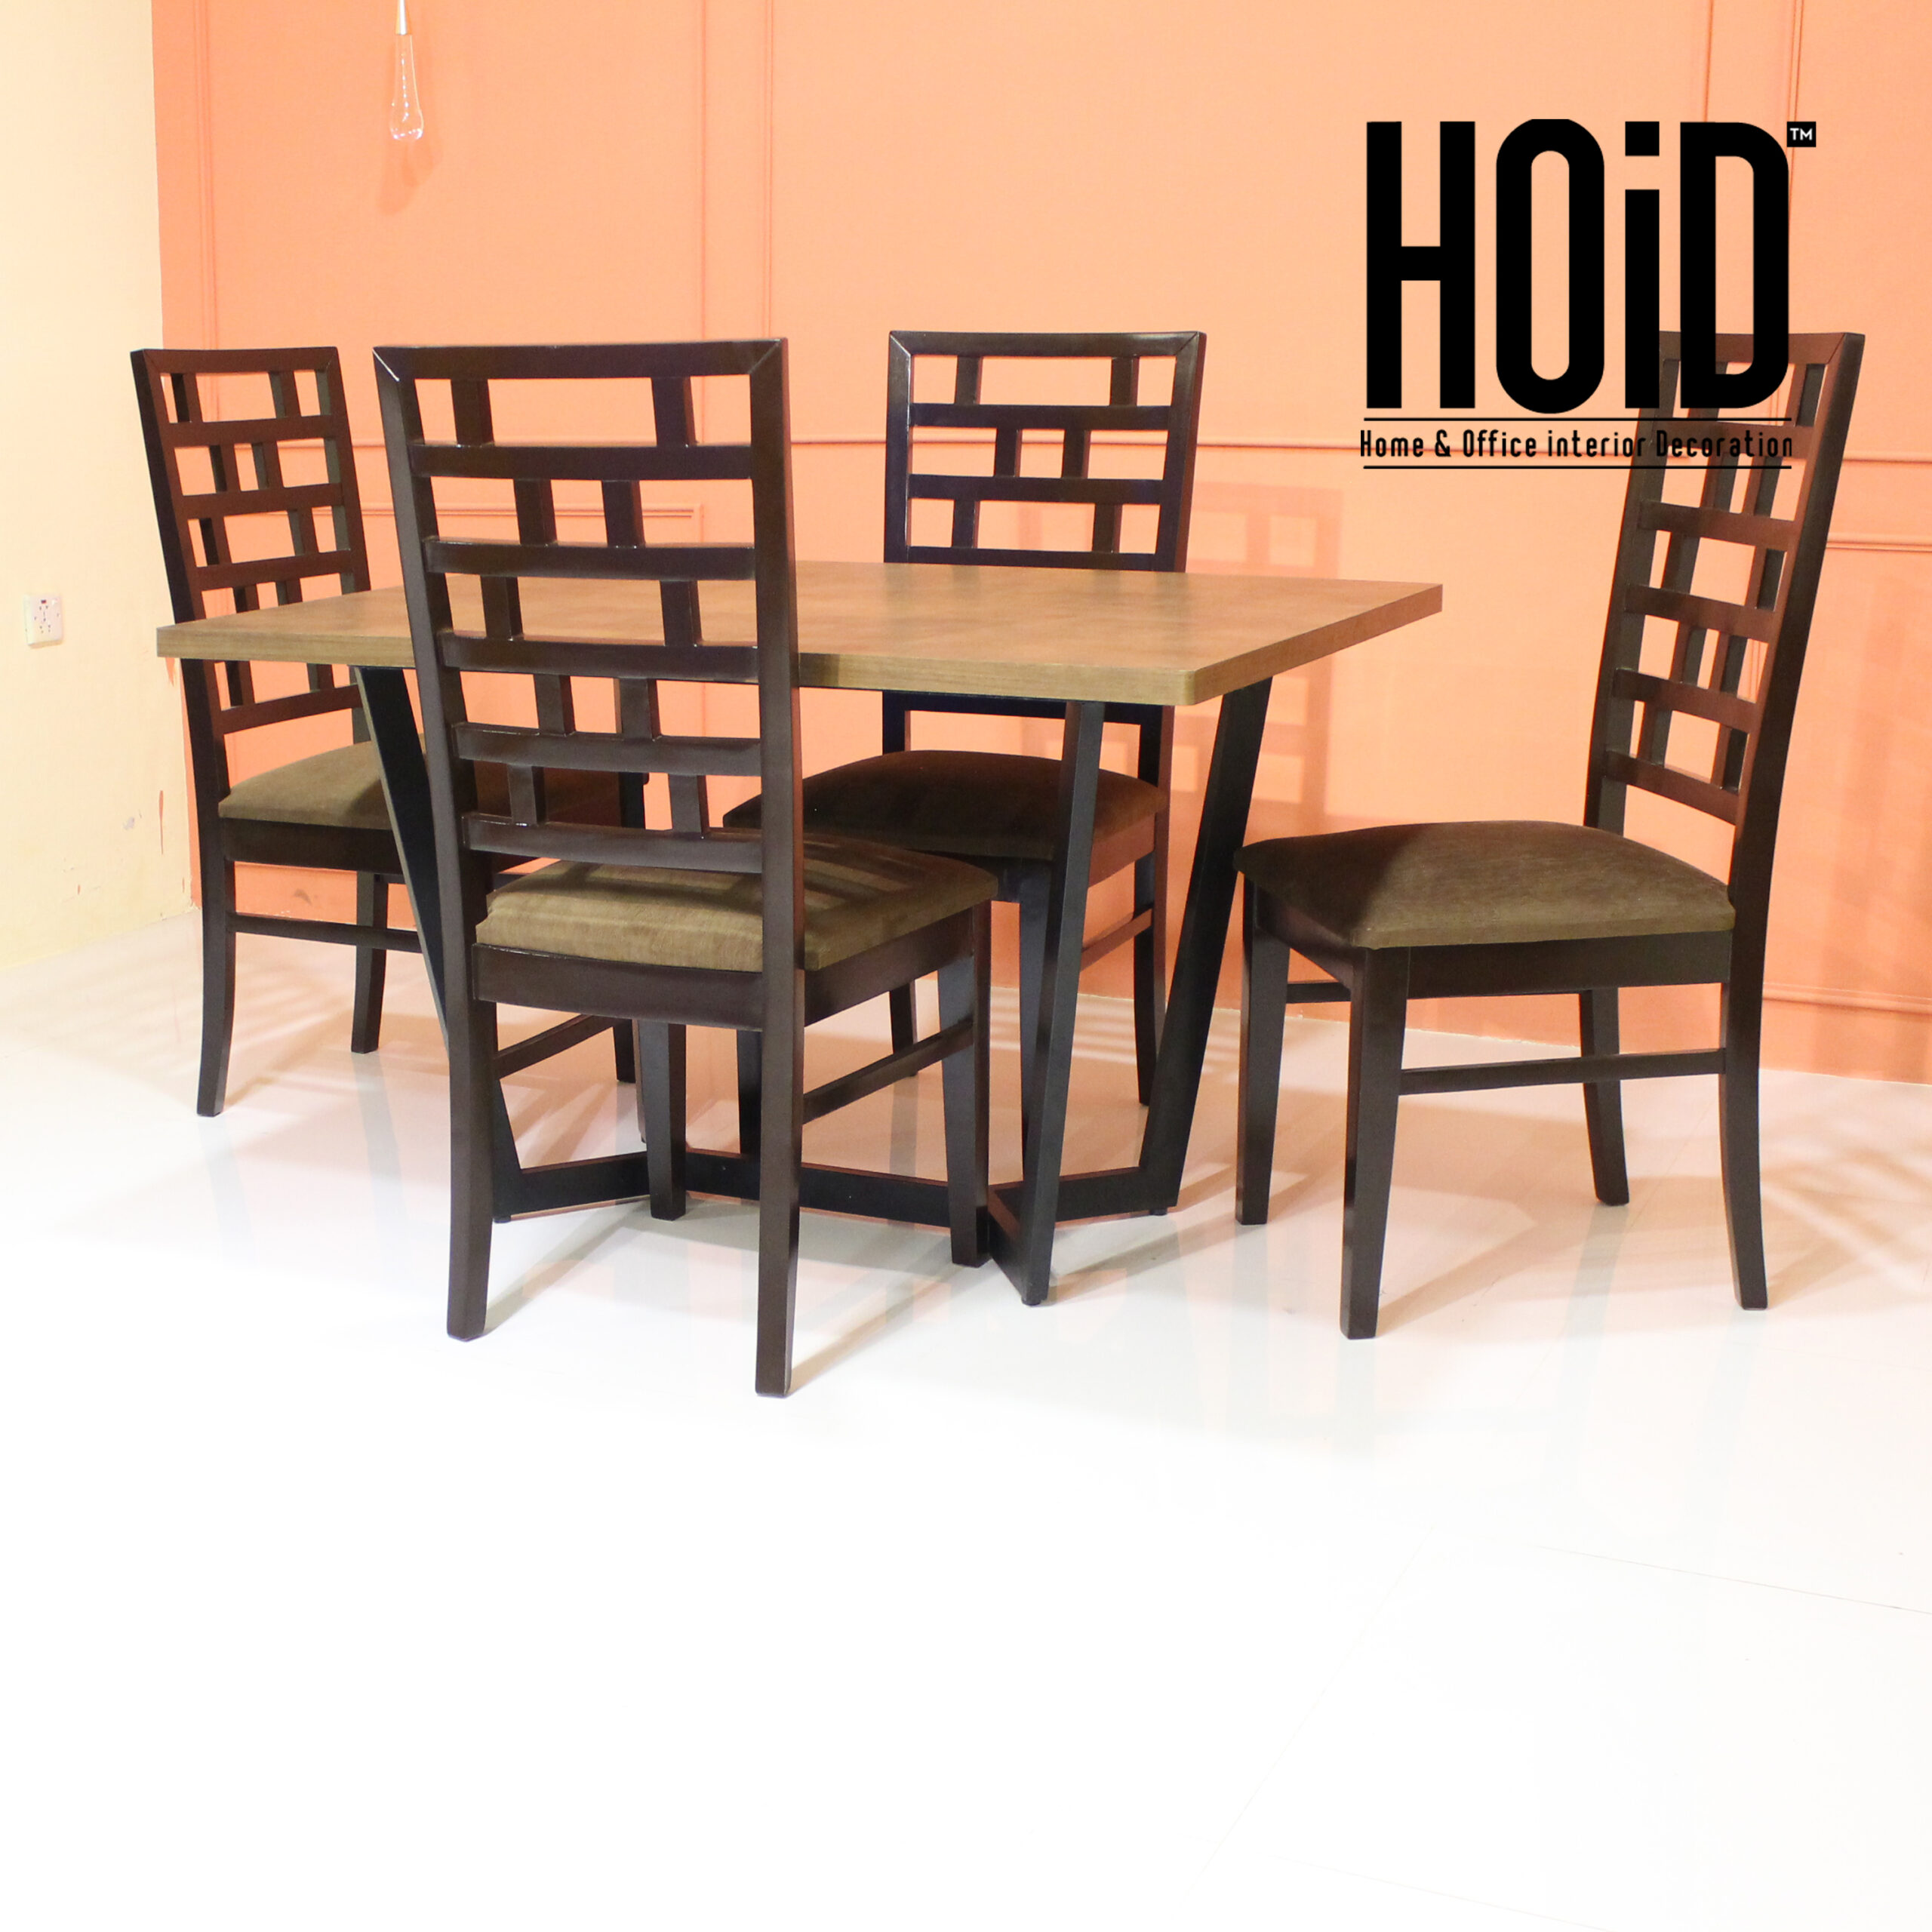 nosot-4-chairs-dining-scaled-2.jpg